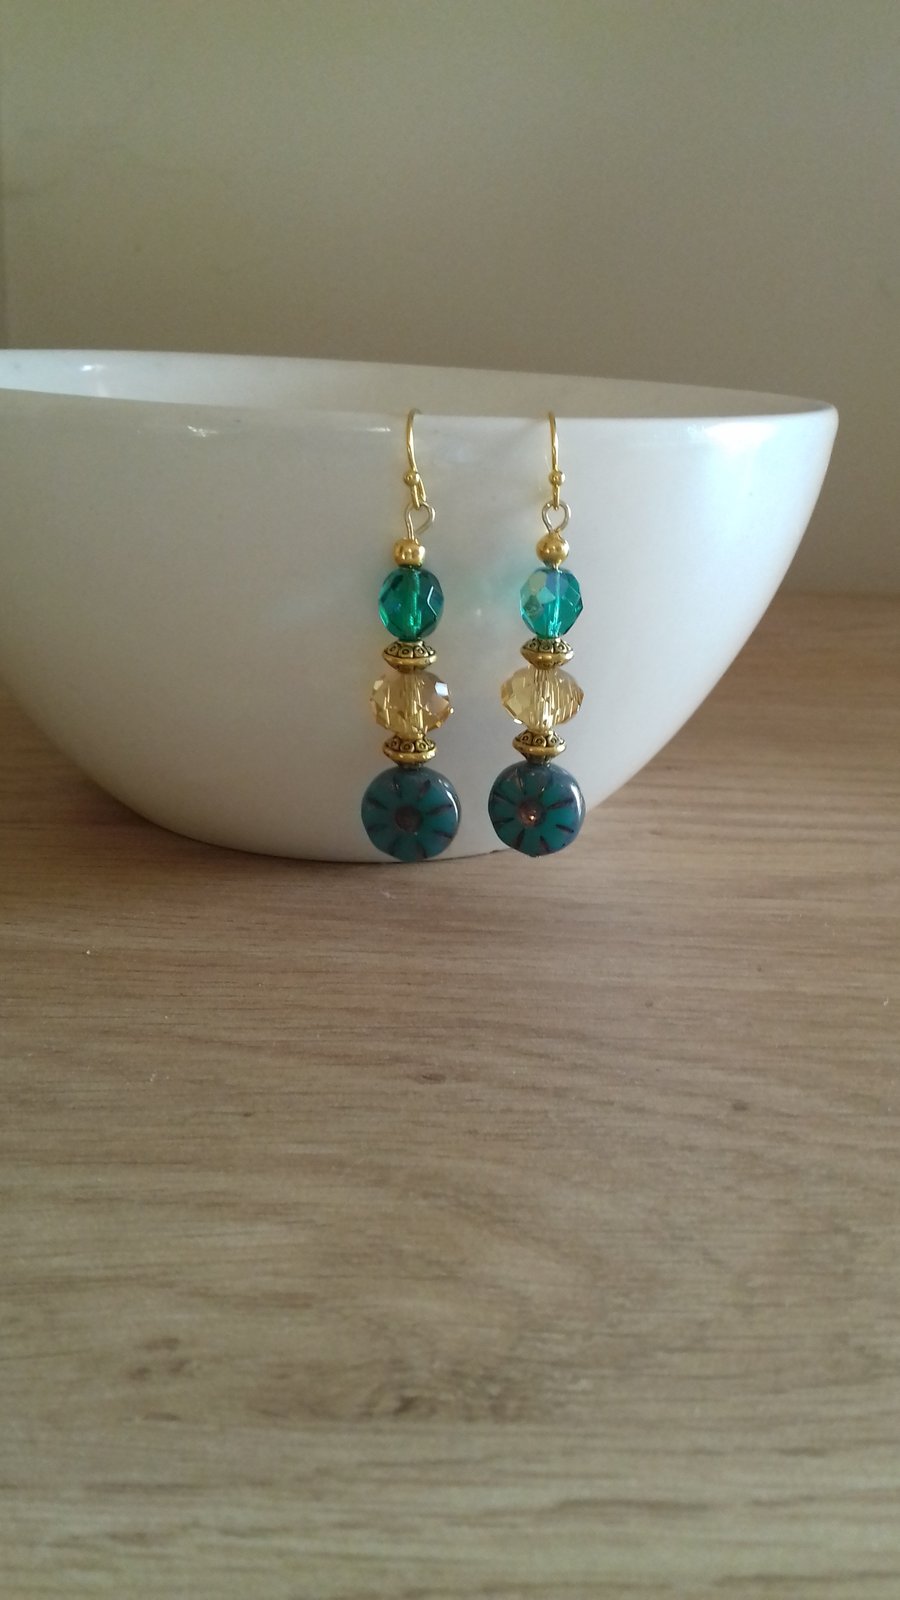 TEAL AND GOLD FLOWER GLASS BEAD EARRINGS.